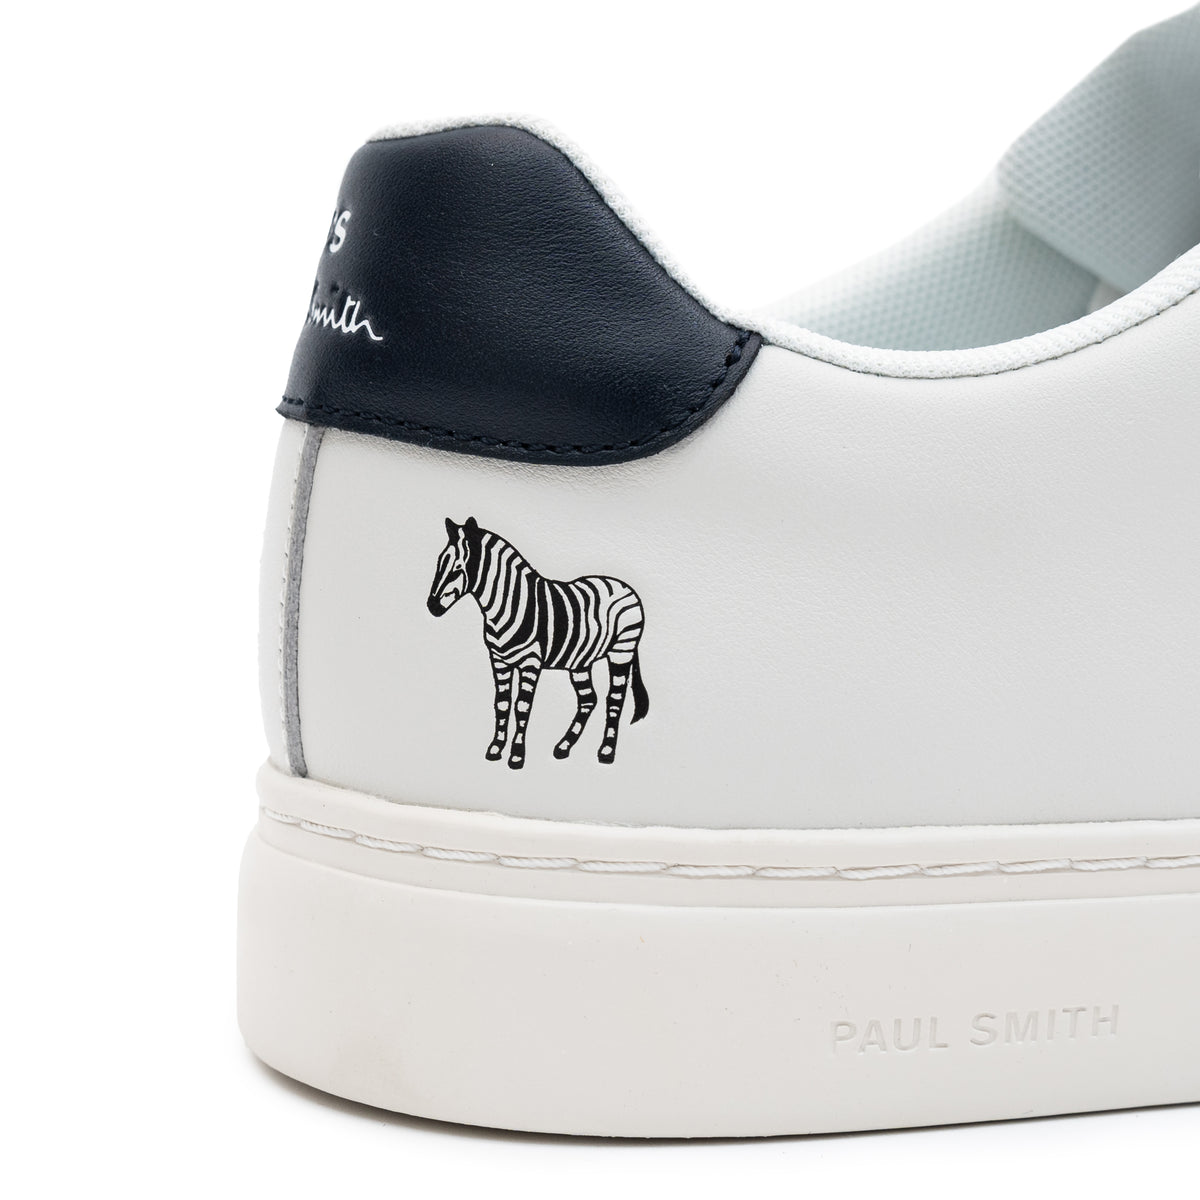 Load image into Gallery viewer, Paul Smith White Navy Tab Rex Shoe
